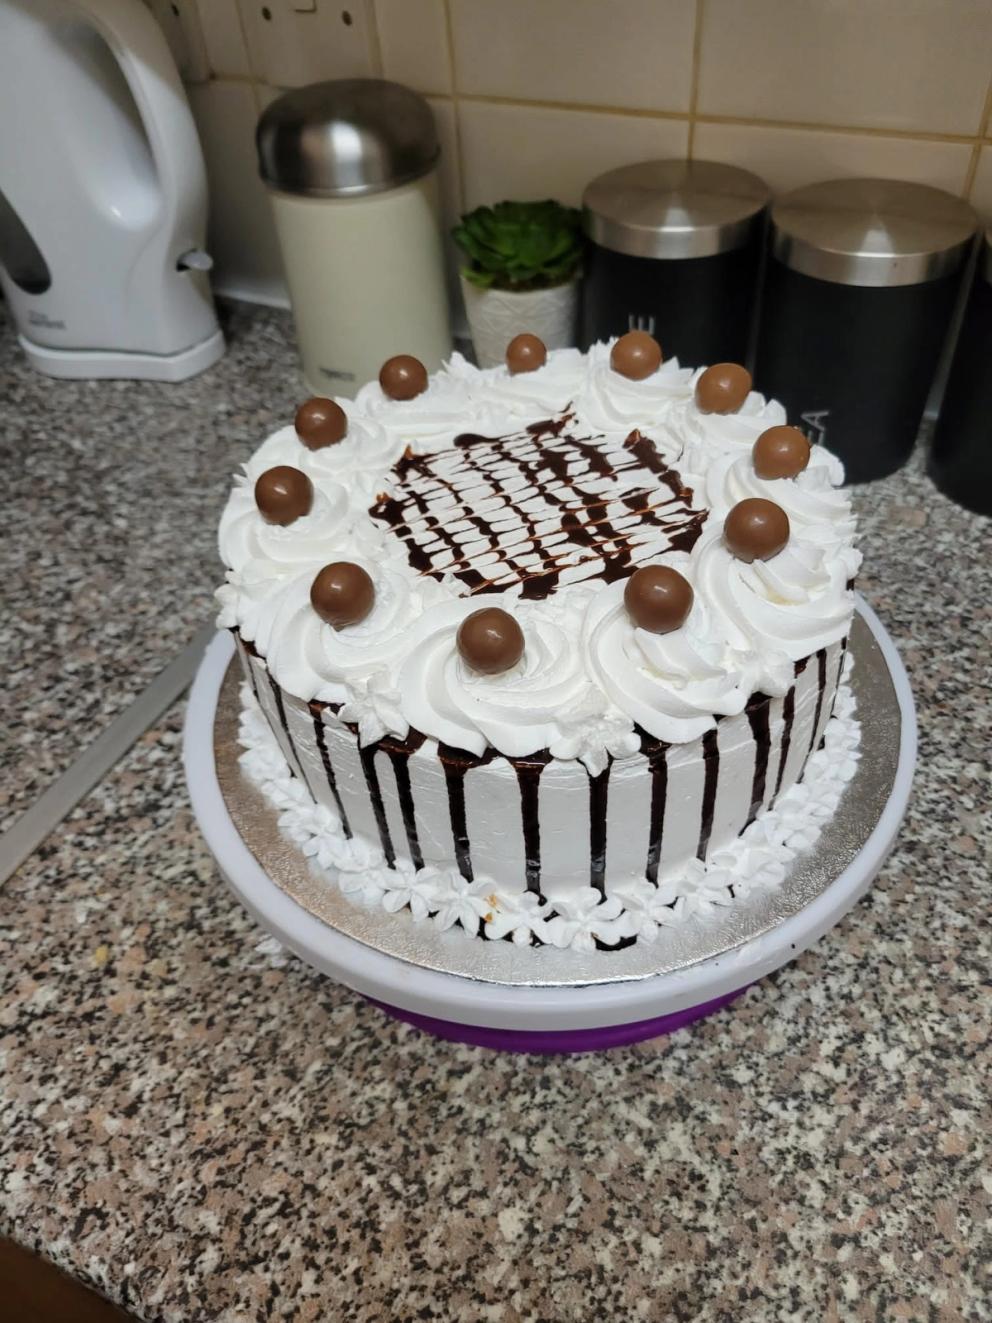 Cooking is one of the things I enjoy doing. I made this  cake for the birthday of a neighbour’s friend, and it  made me feel like I had produced something beautiful.  Eiman Abdalrahim